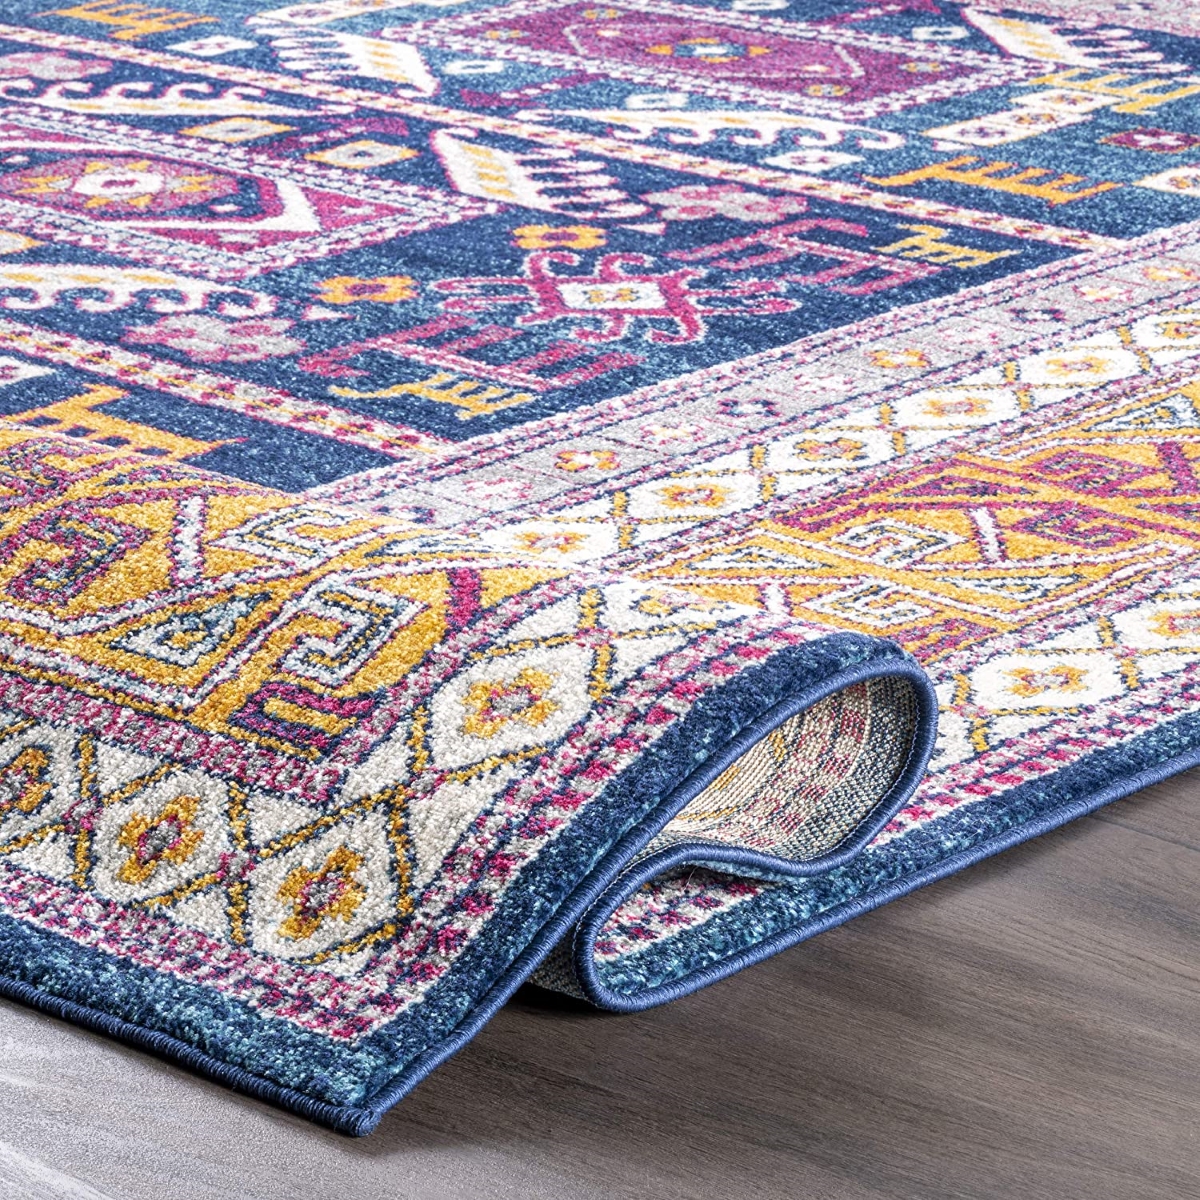 types of rugs - colorful print rug